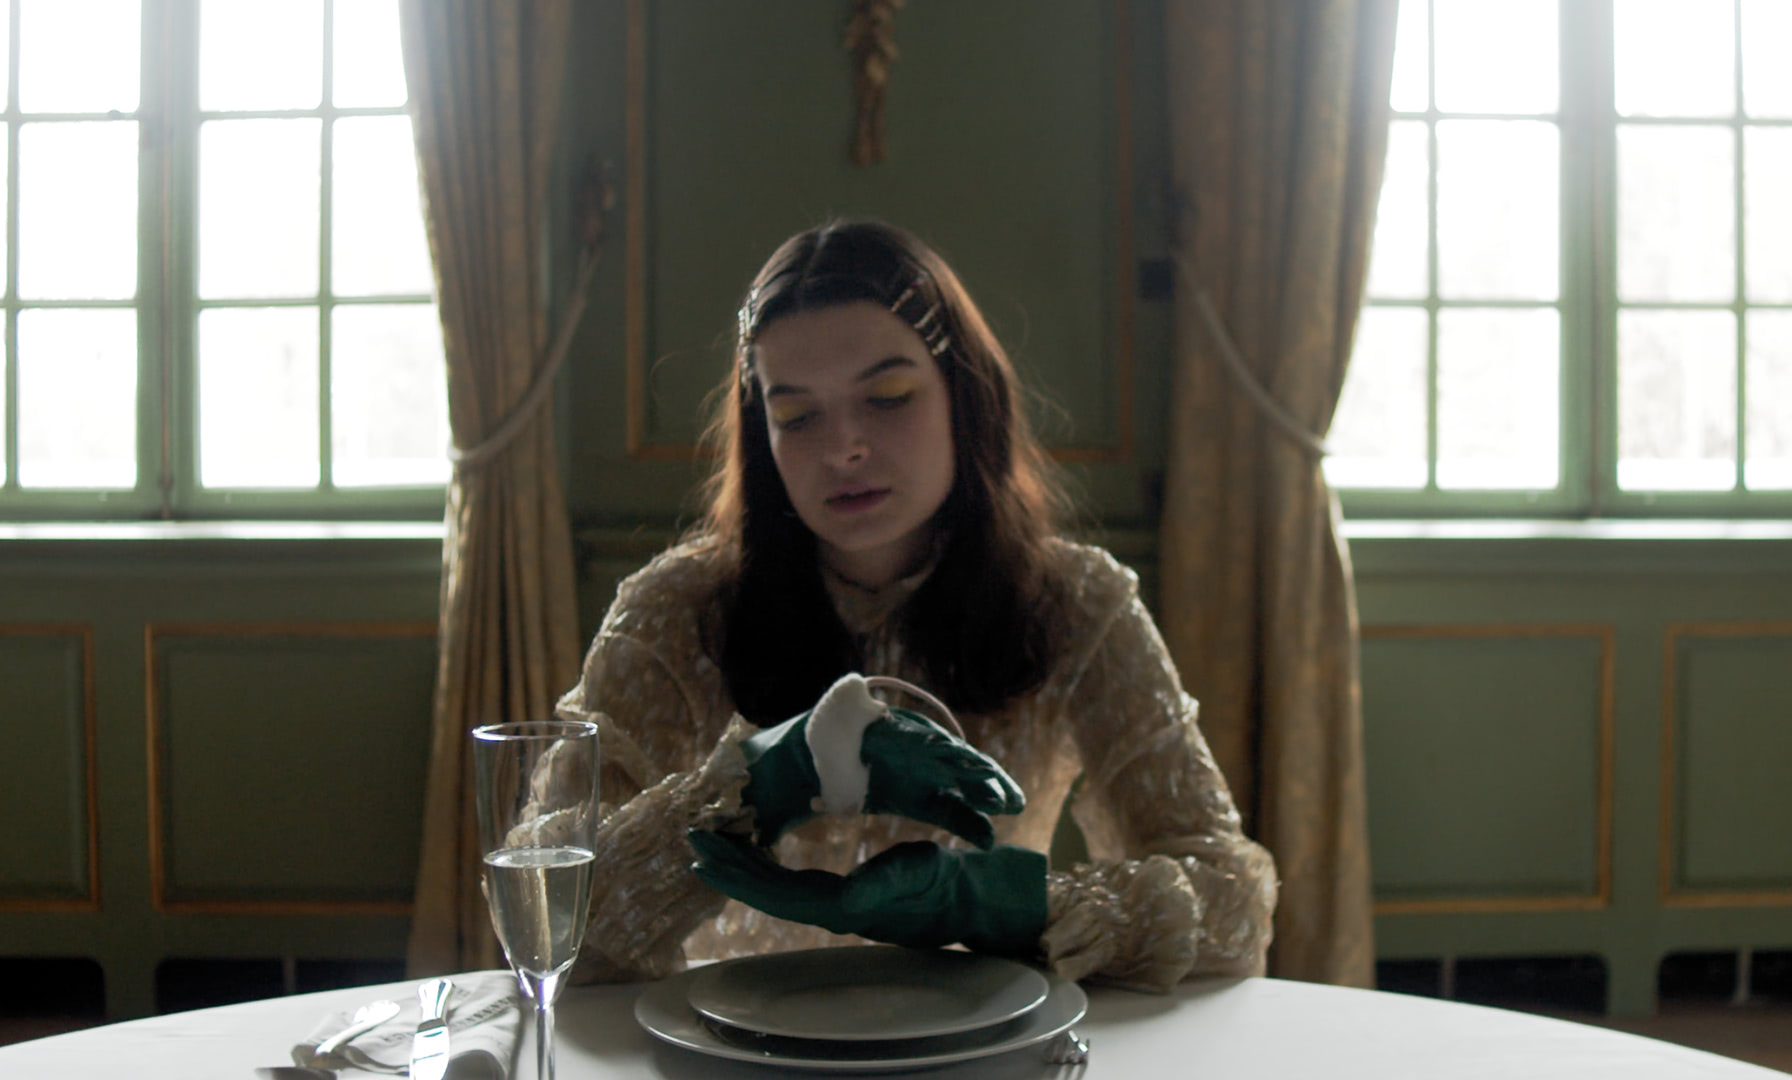 A young woman sitting at the table of an opulent green dining room, holding a white mouse in her hand.